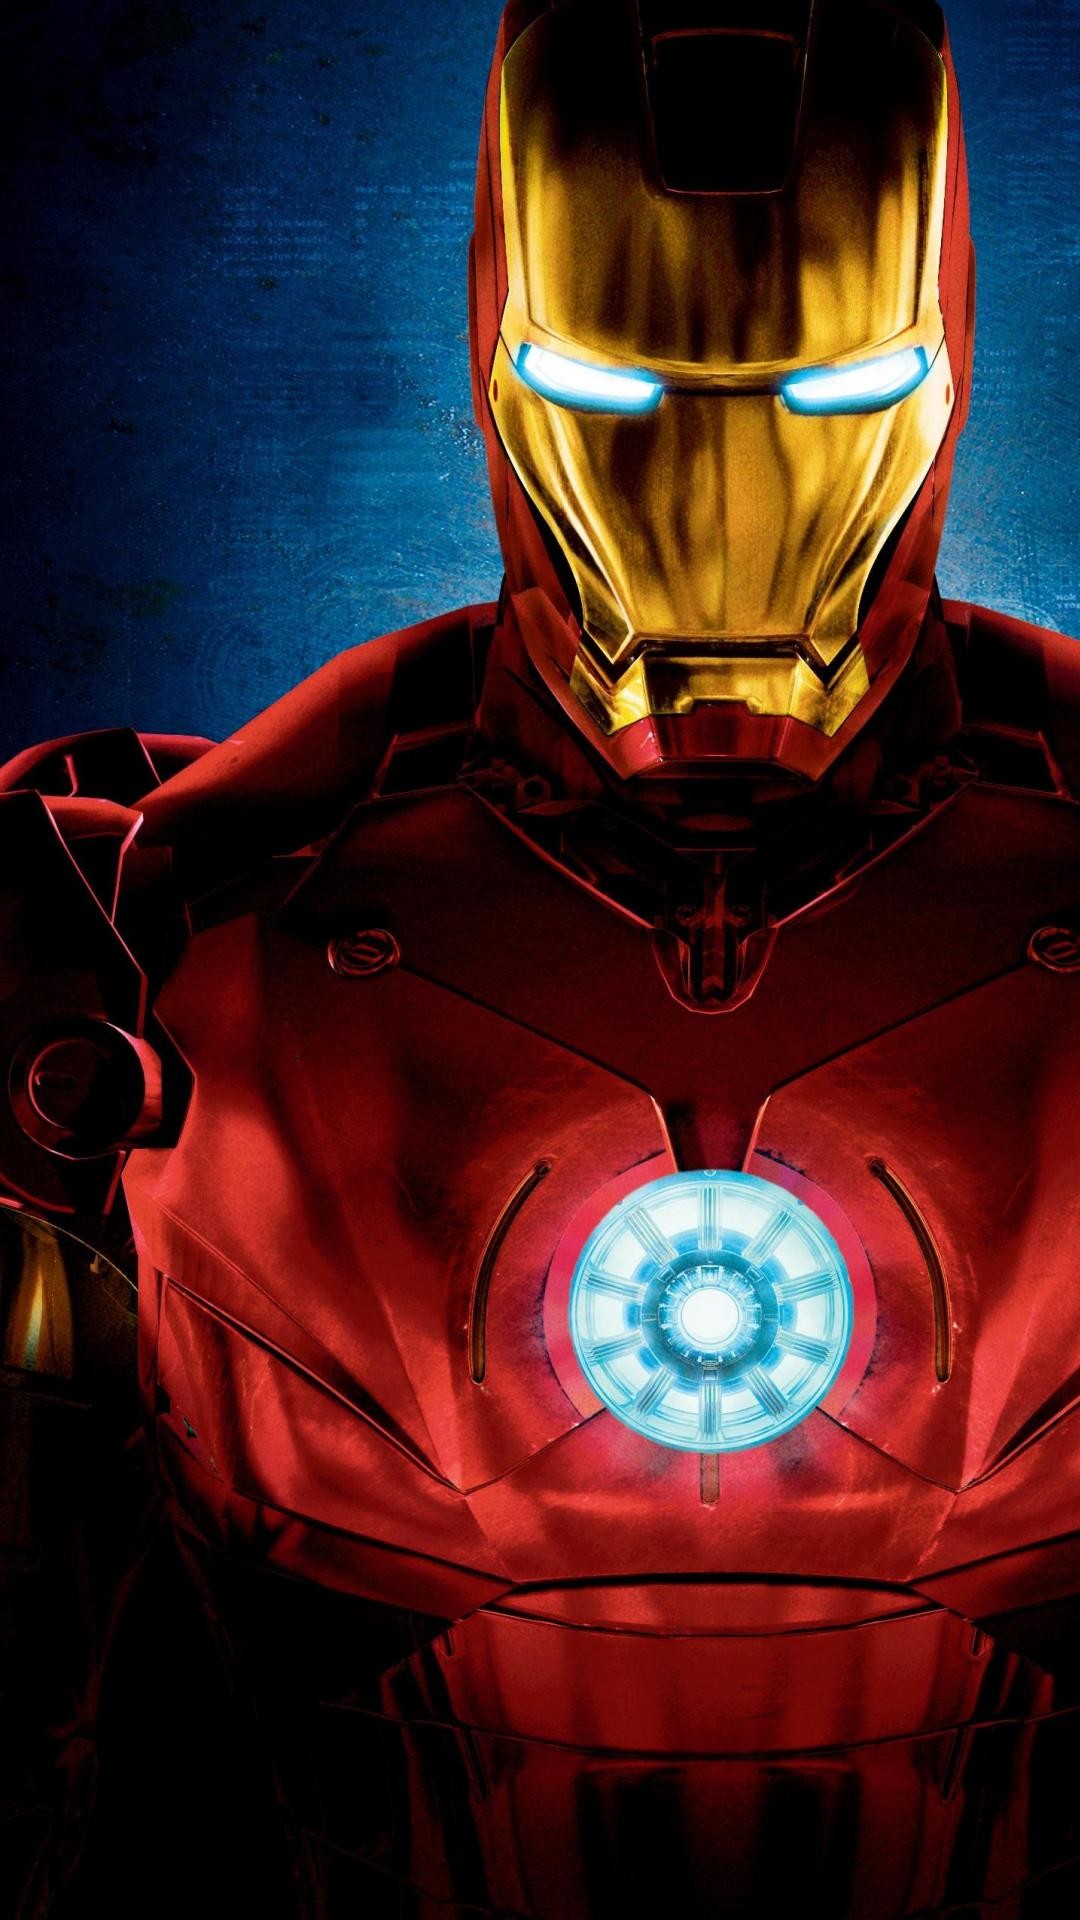 1080x1920 iron man hd wallpapers for mobile #271392